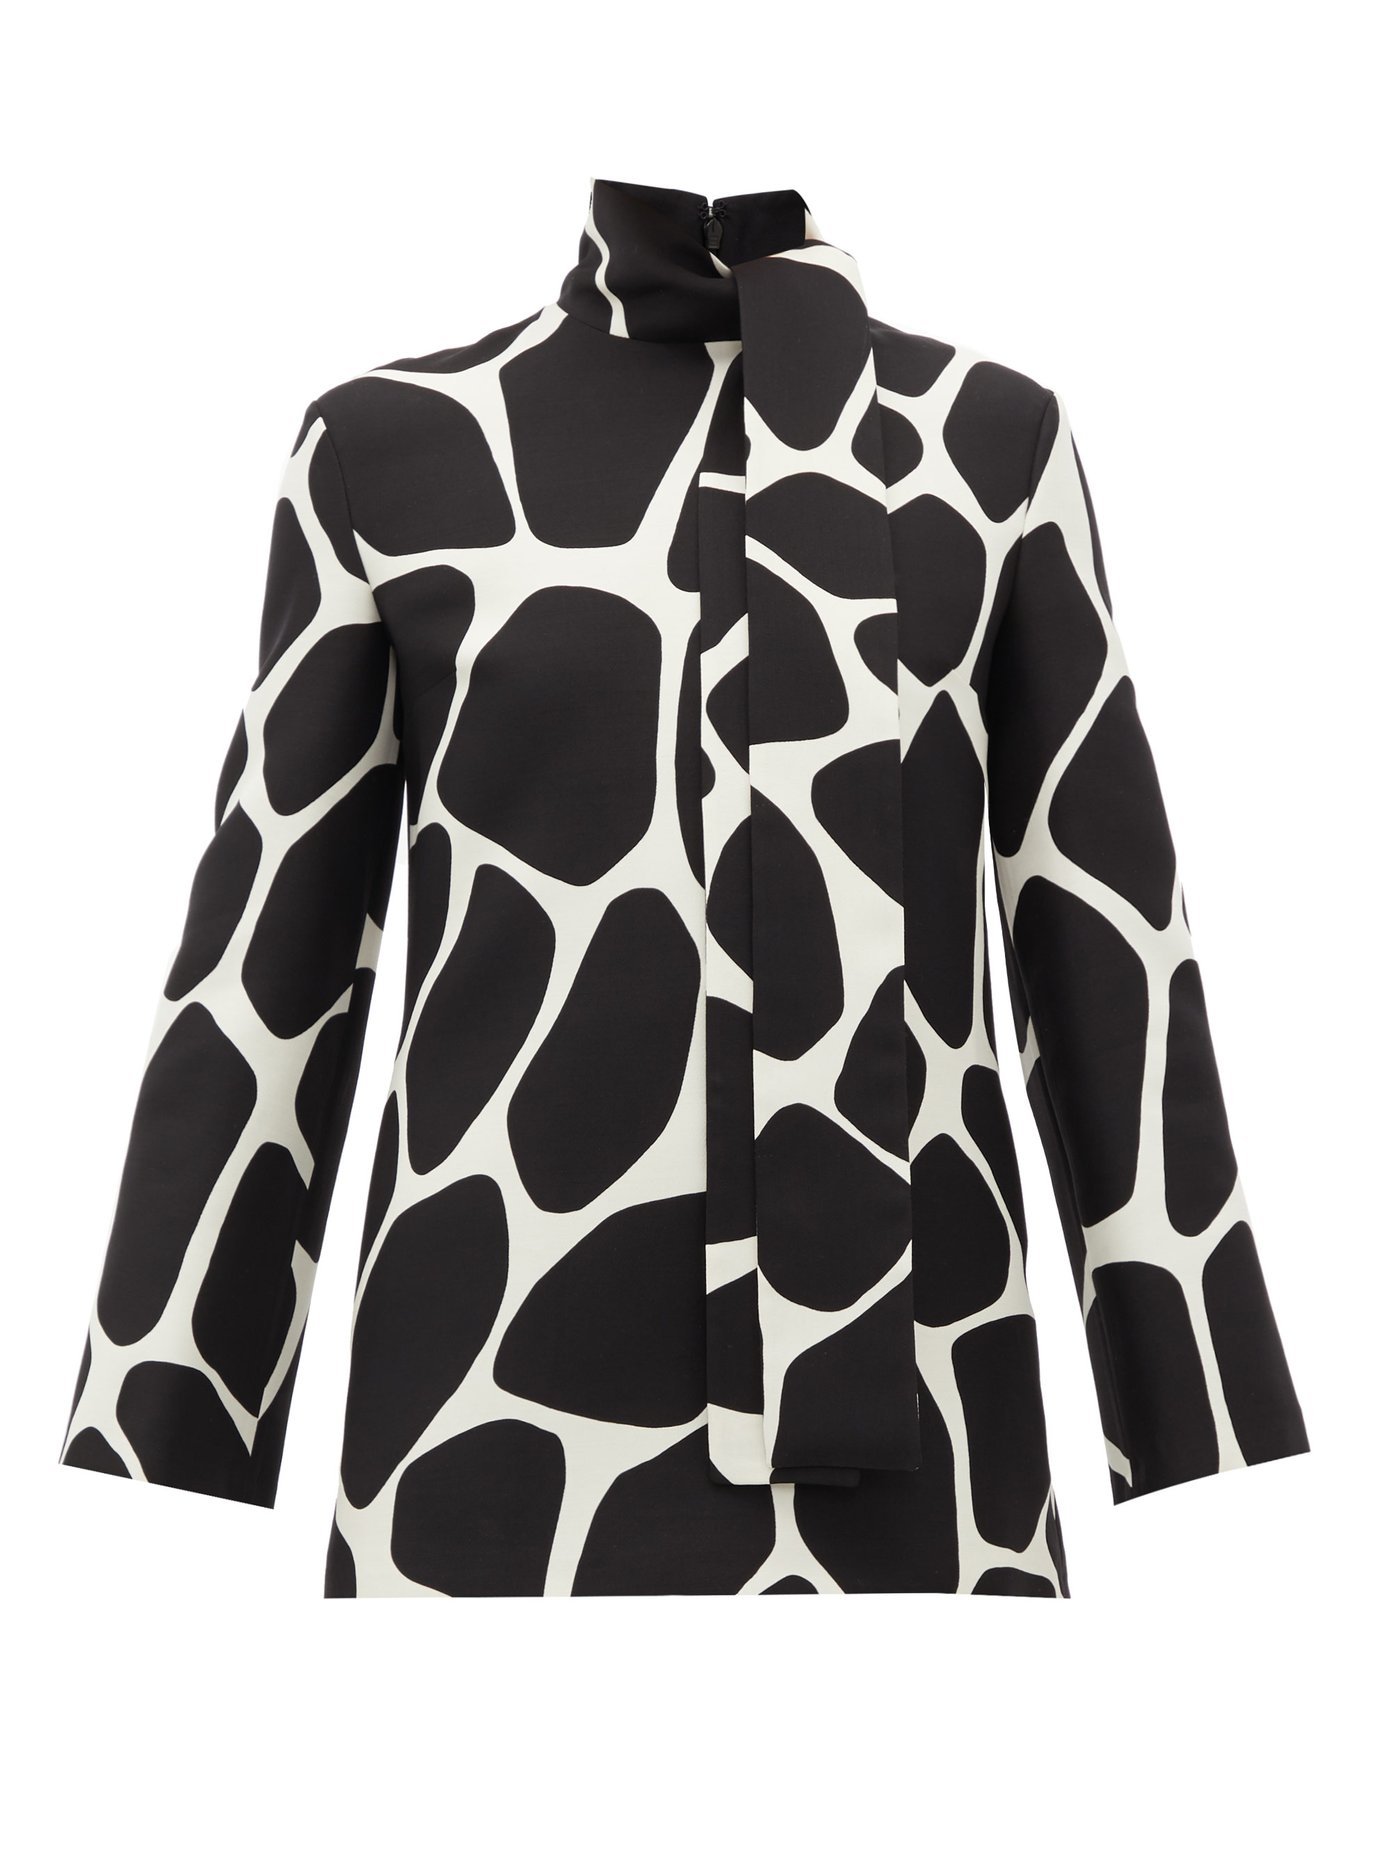 Pussy-bow 1966 giraffe-print wool-blend top by VALENTINO, available on matchesfashion.com for $1150 Heidi Klum Top Exact Product 